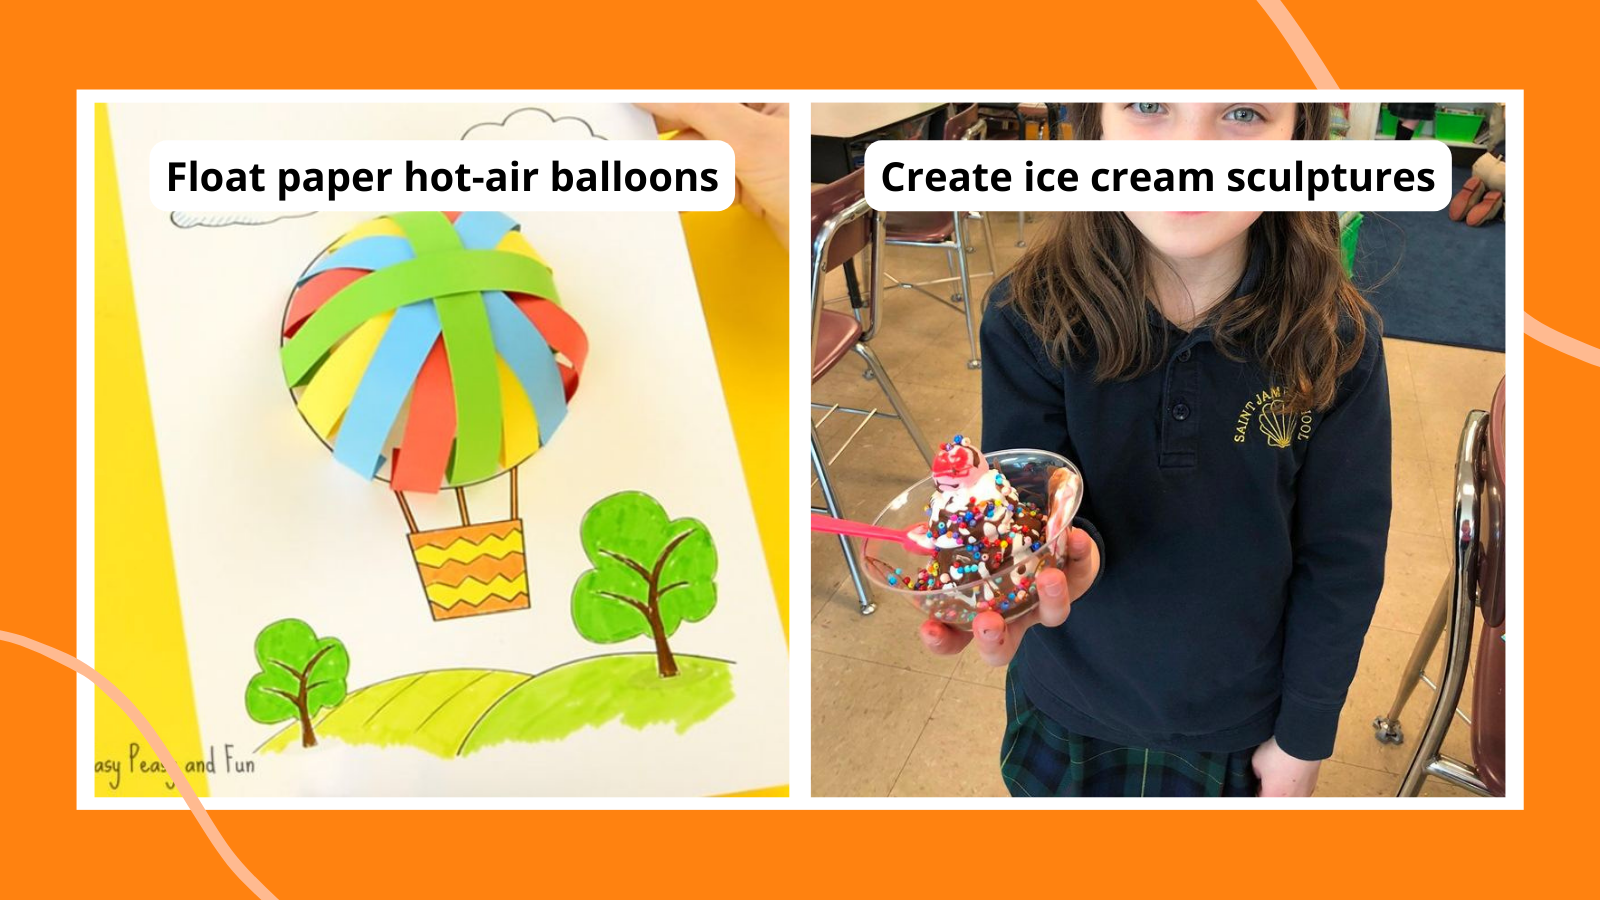 Examples of second grade art projects including a girl holding an ice cream sculpture and a 3D hot air balloon drawing.